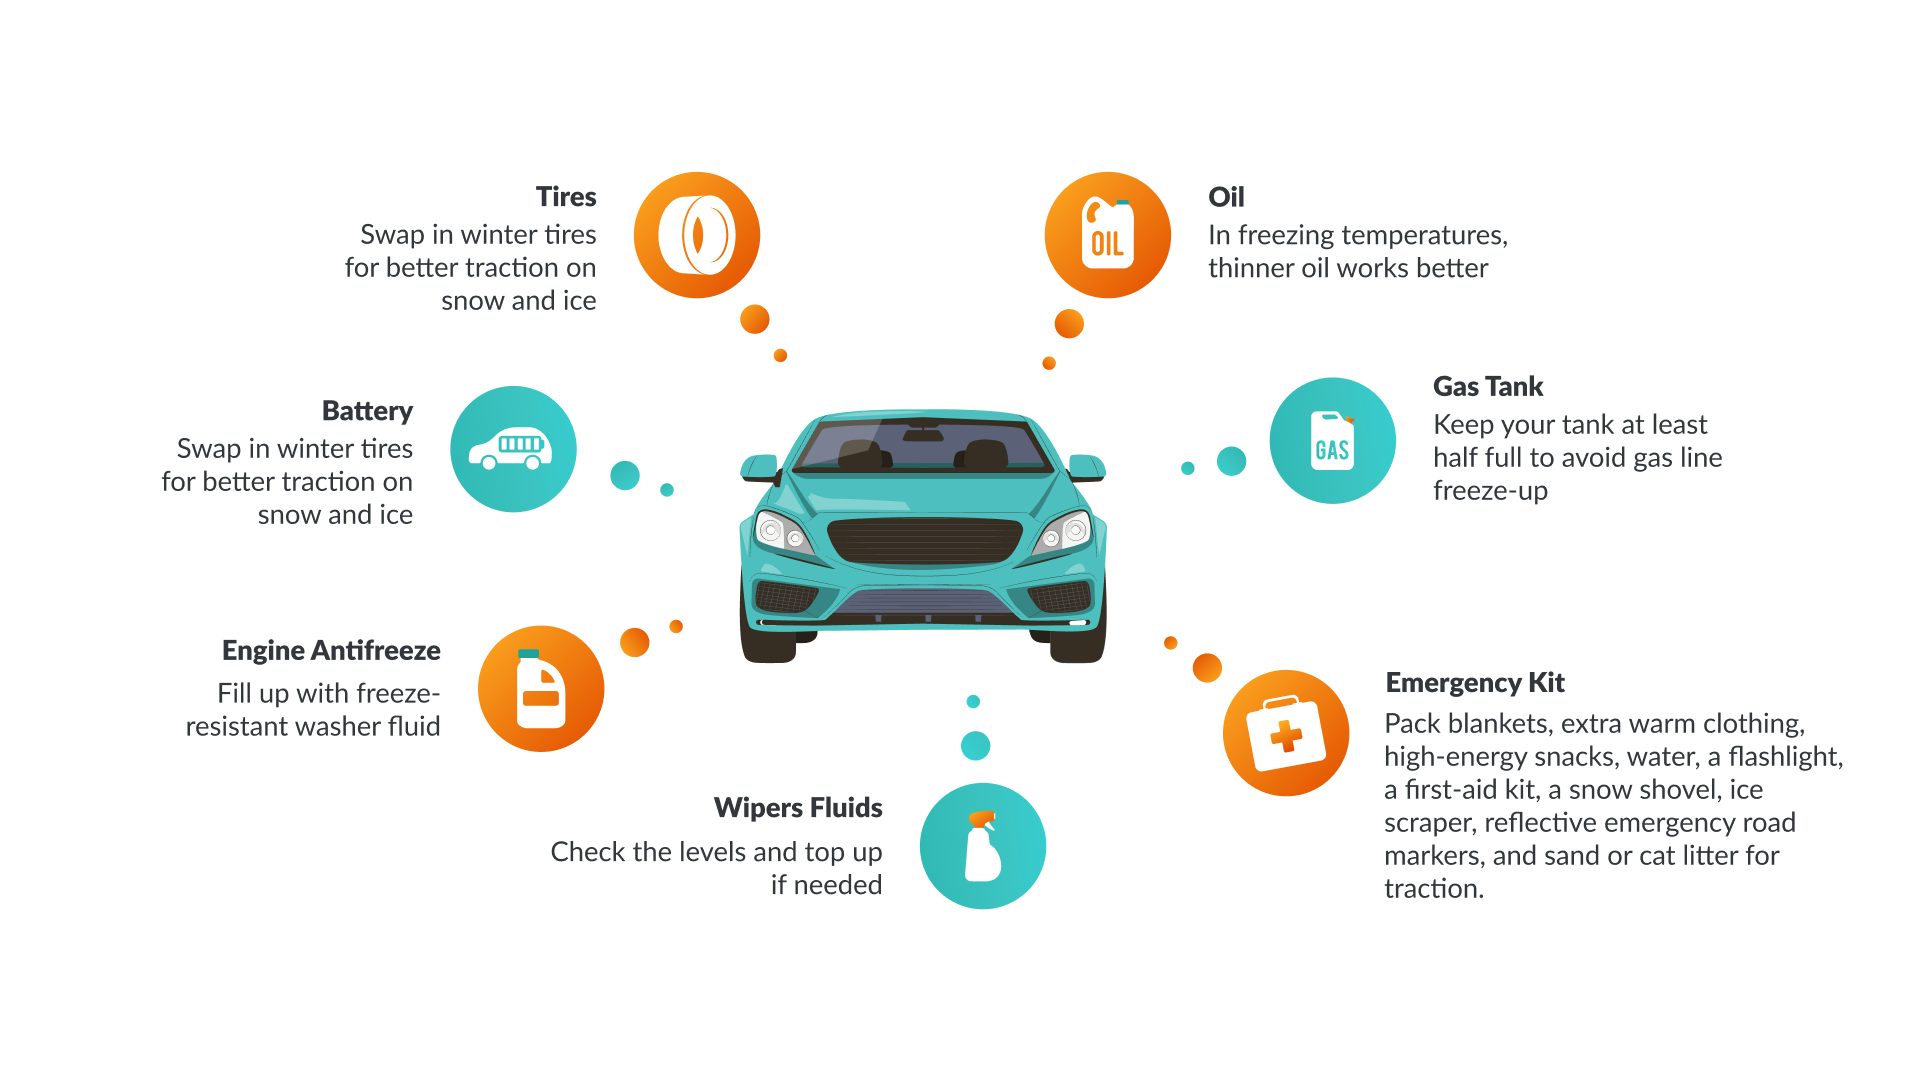 infographic abut how to prepare the car for winter driving